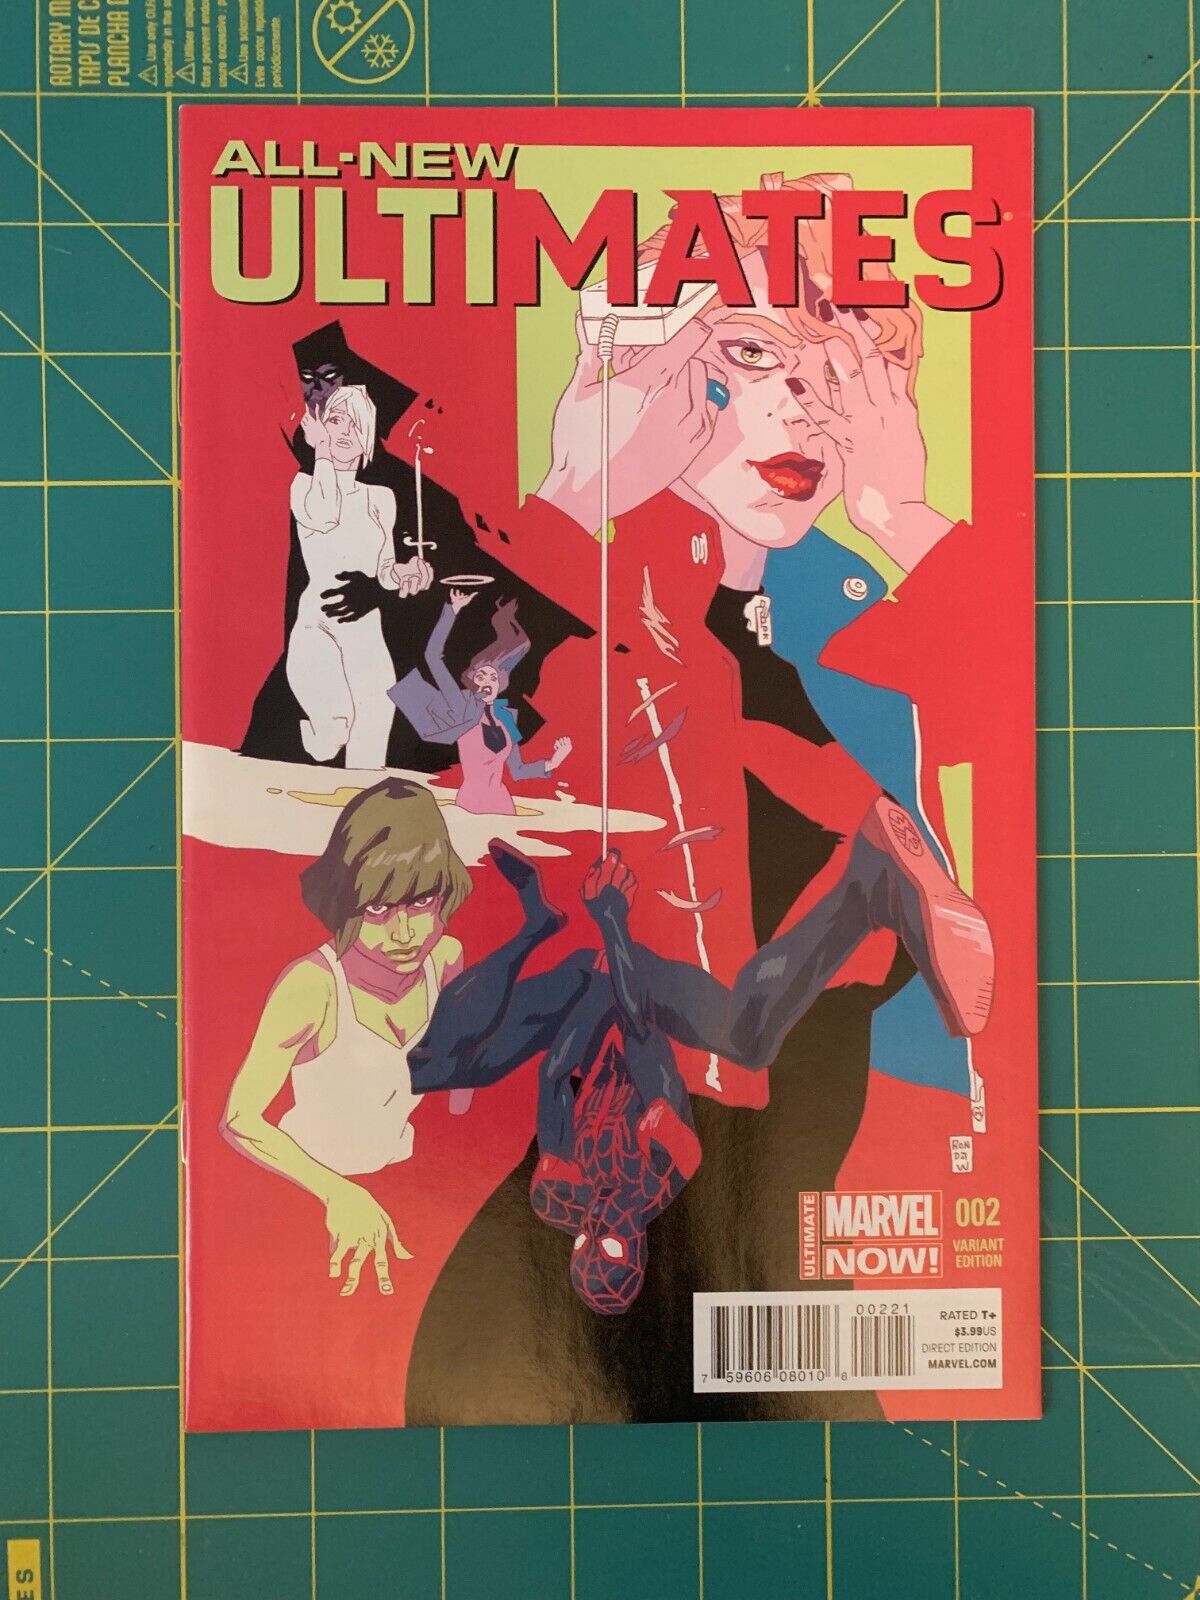 All New Ultimates #2 - Jul 2014 - #2B / 1:25 Incentive Variant - (8544)